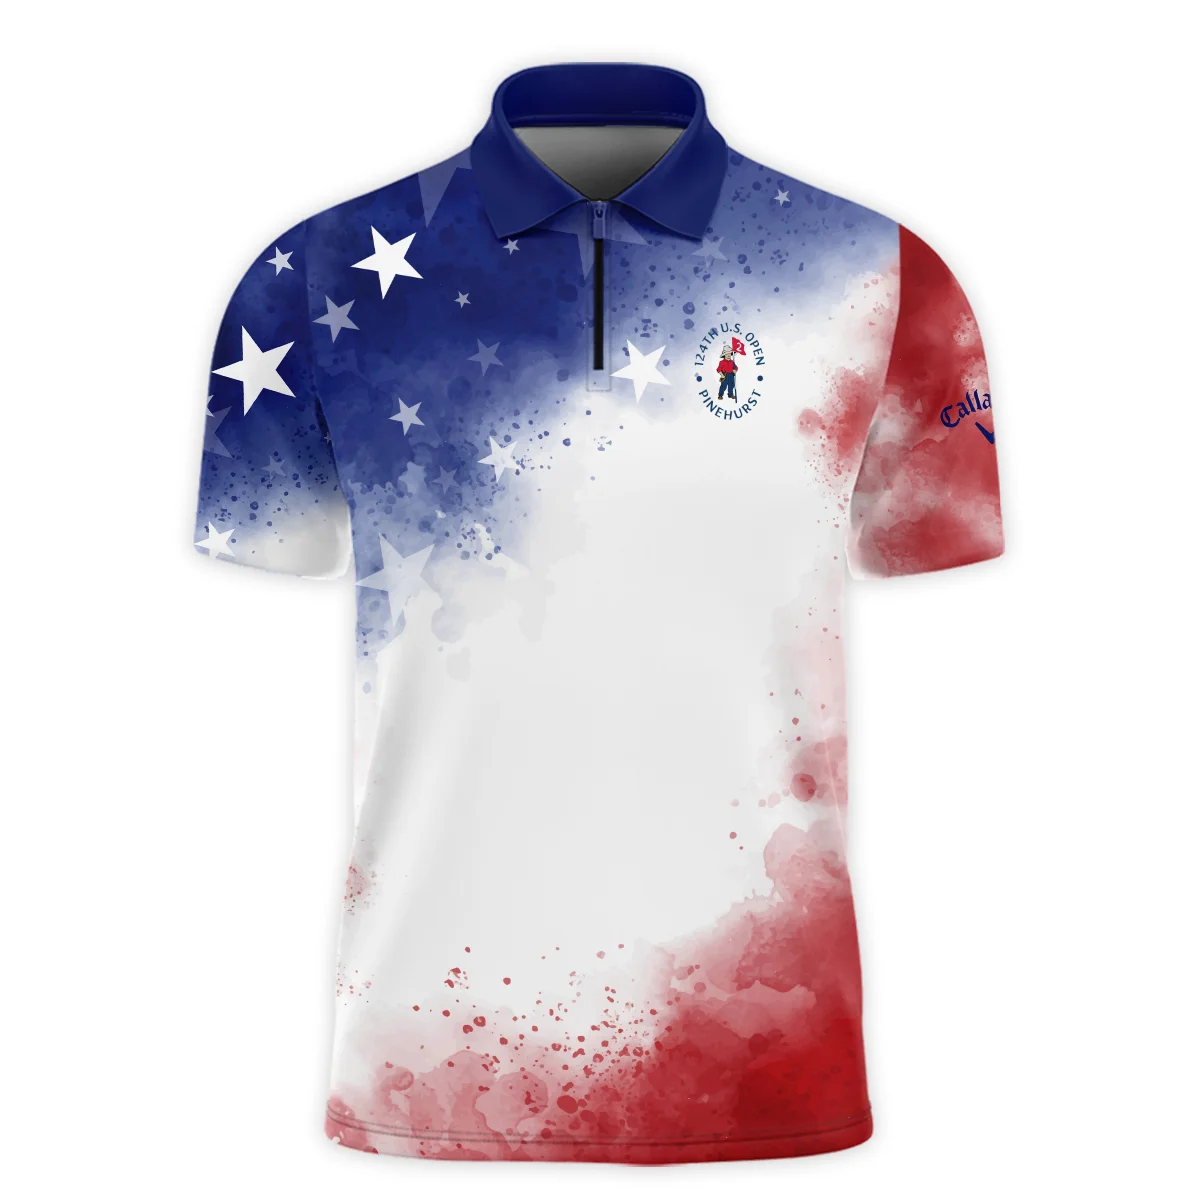 124th U.S. Open Pinehurst Callaway Blue Red Watercolor Star White Backgound Vneck Polo Shirt Style Classic Polo Shirt For Men